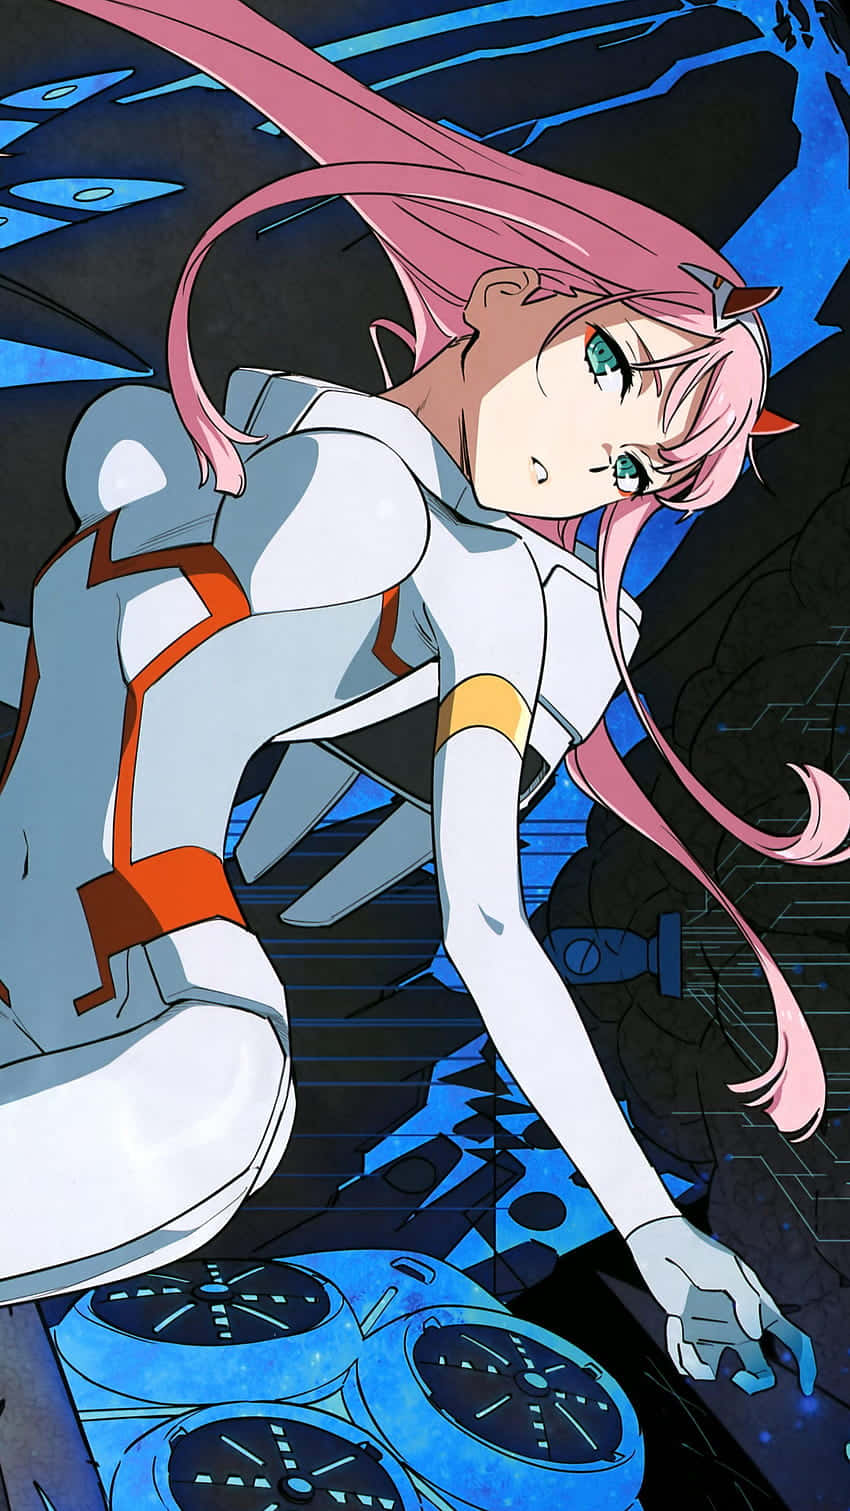 Redefine Your Phone with a Darling in the Franxx Case Wallpaper